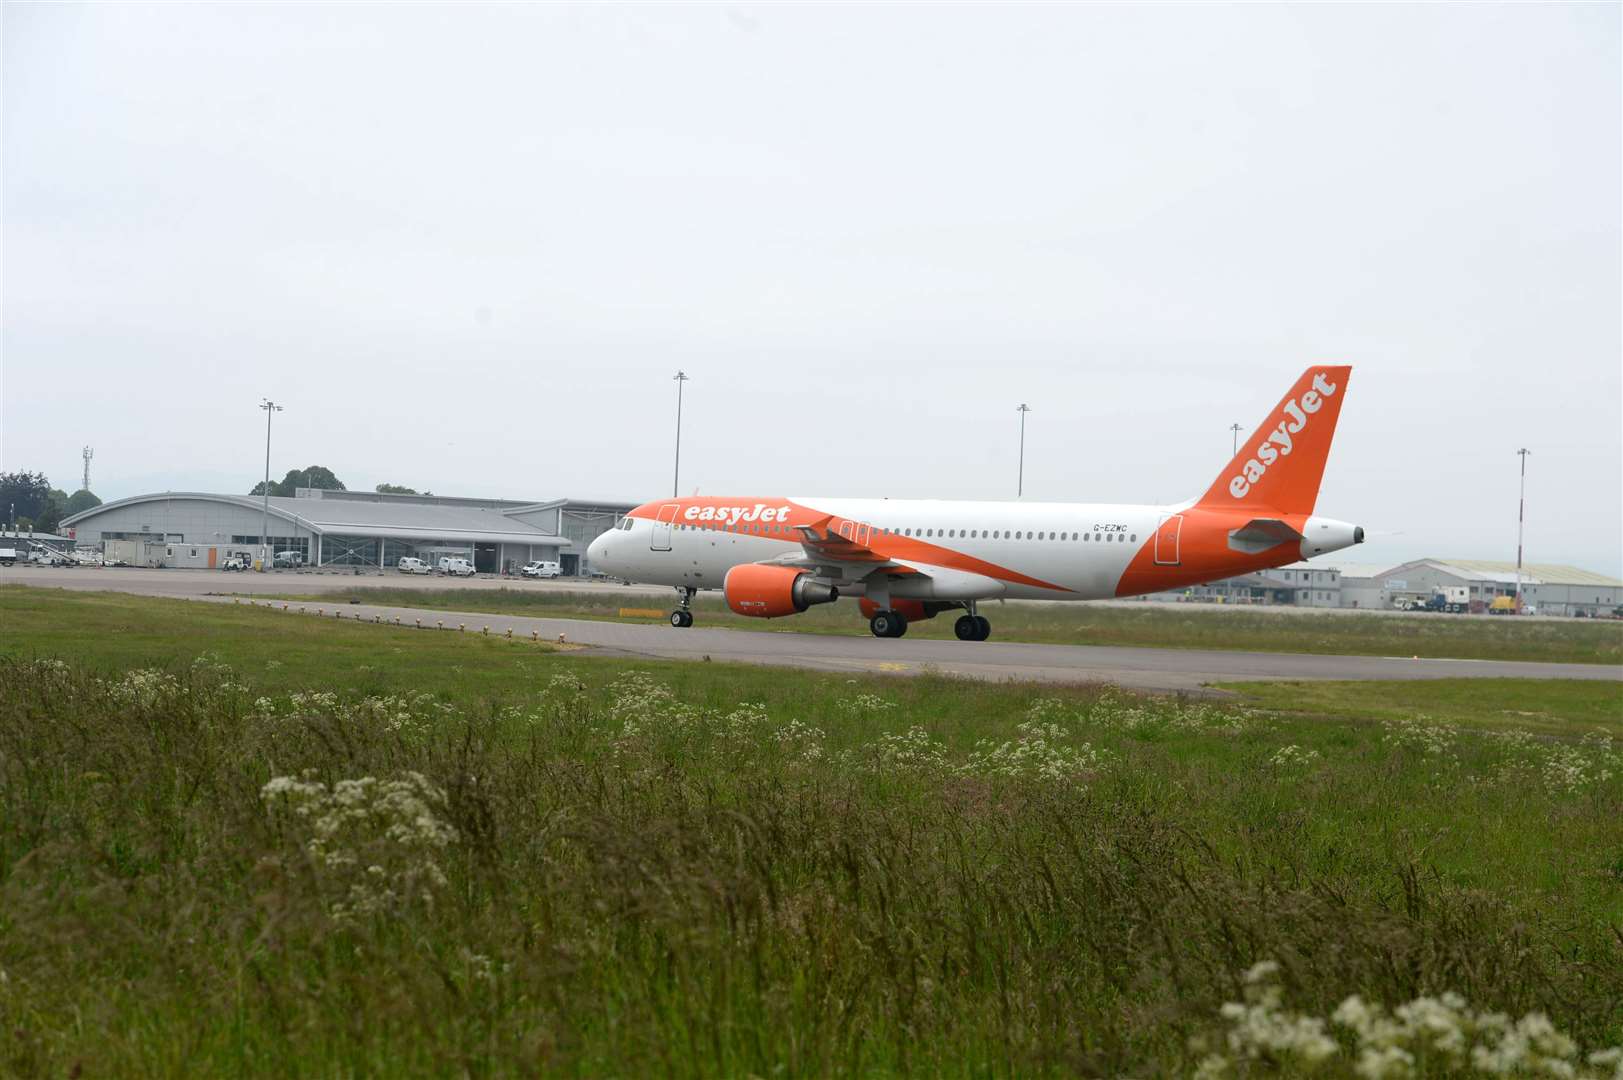 MPs have written to Scottish airports including Inverness plus easyJet and British Airways following a spate of delayed and cancelled flights.